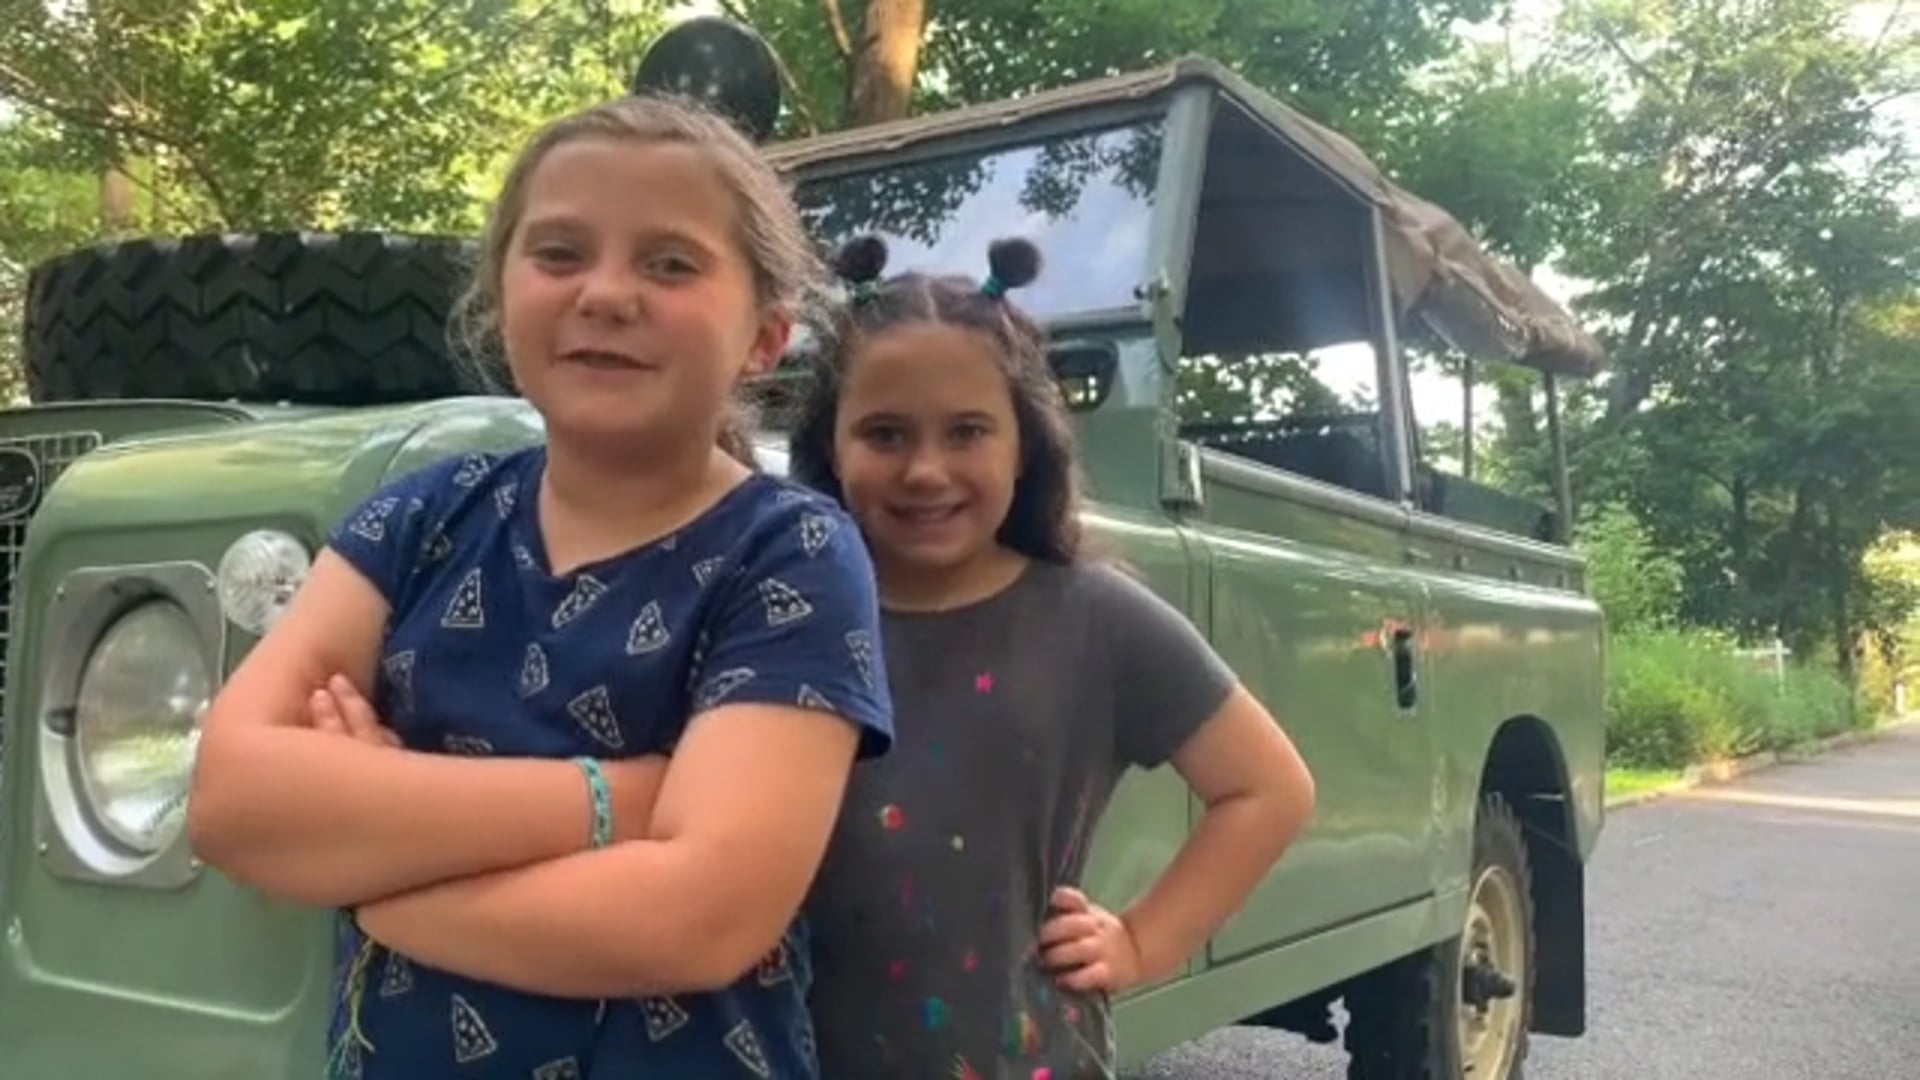 CLASSIC LAND ROVER PITCH 'RANDAZZLE SISTERS'